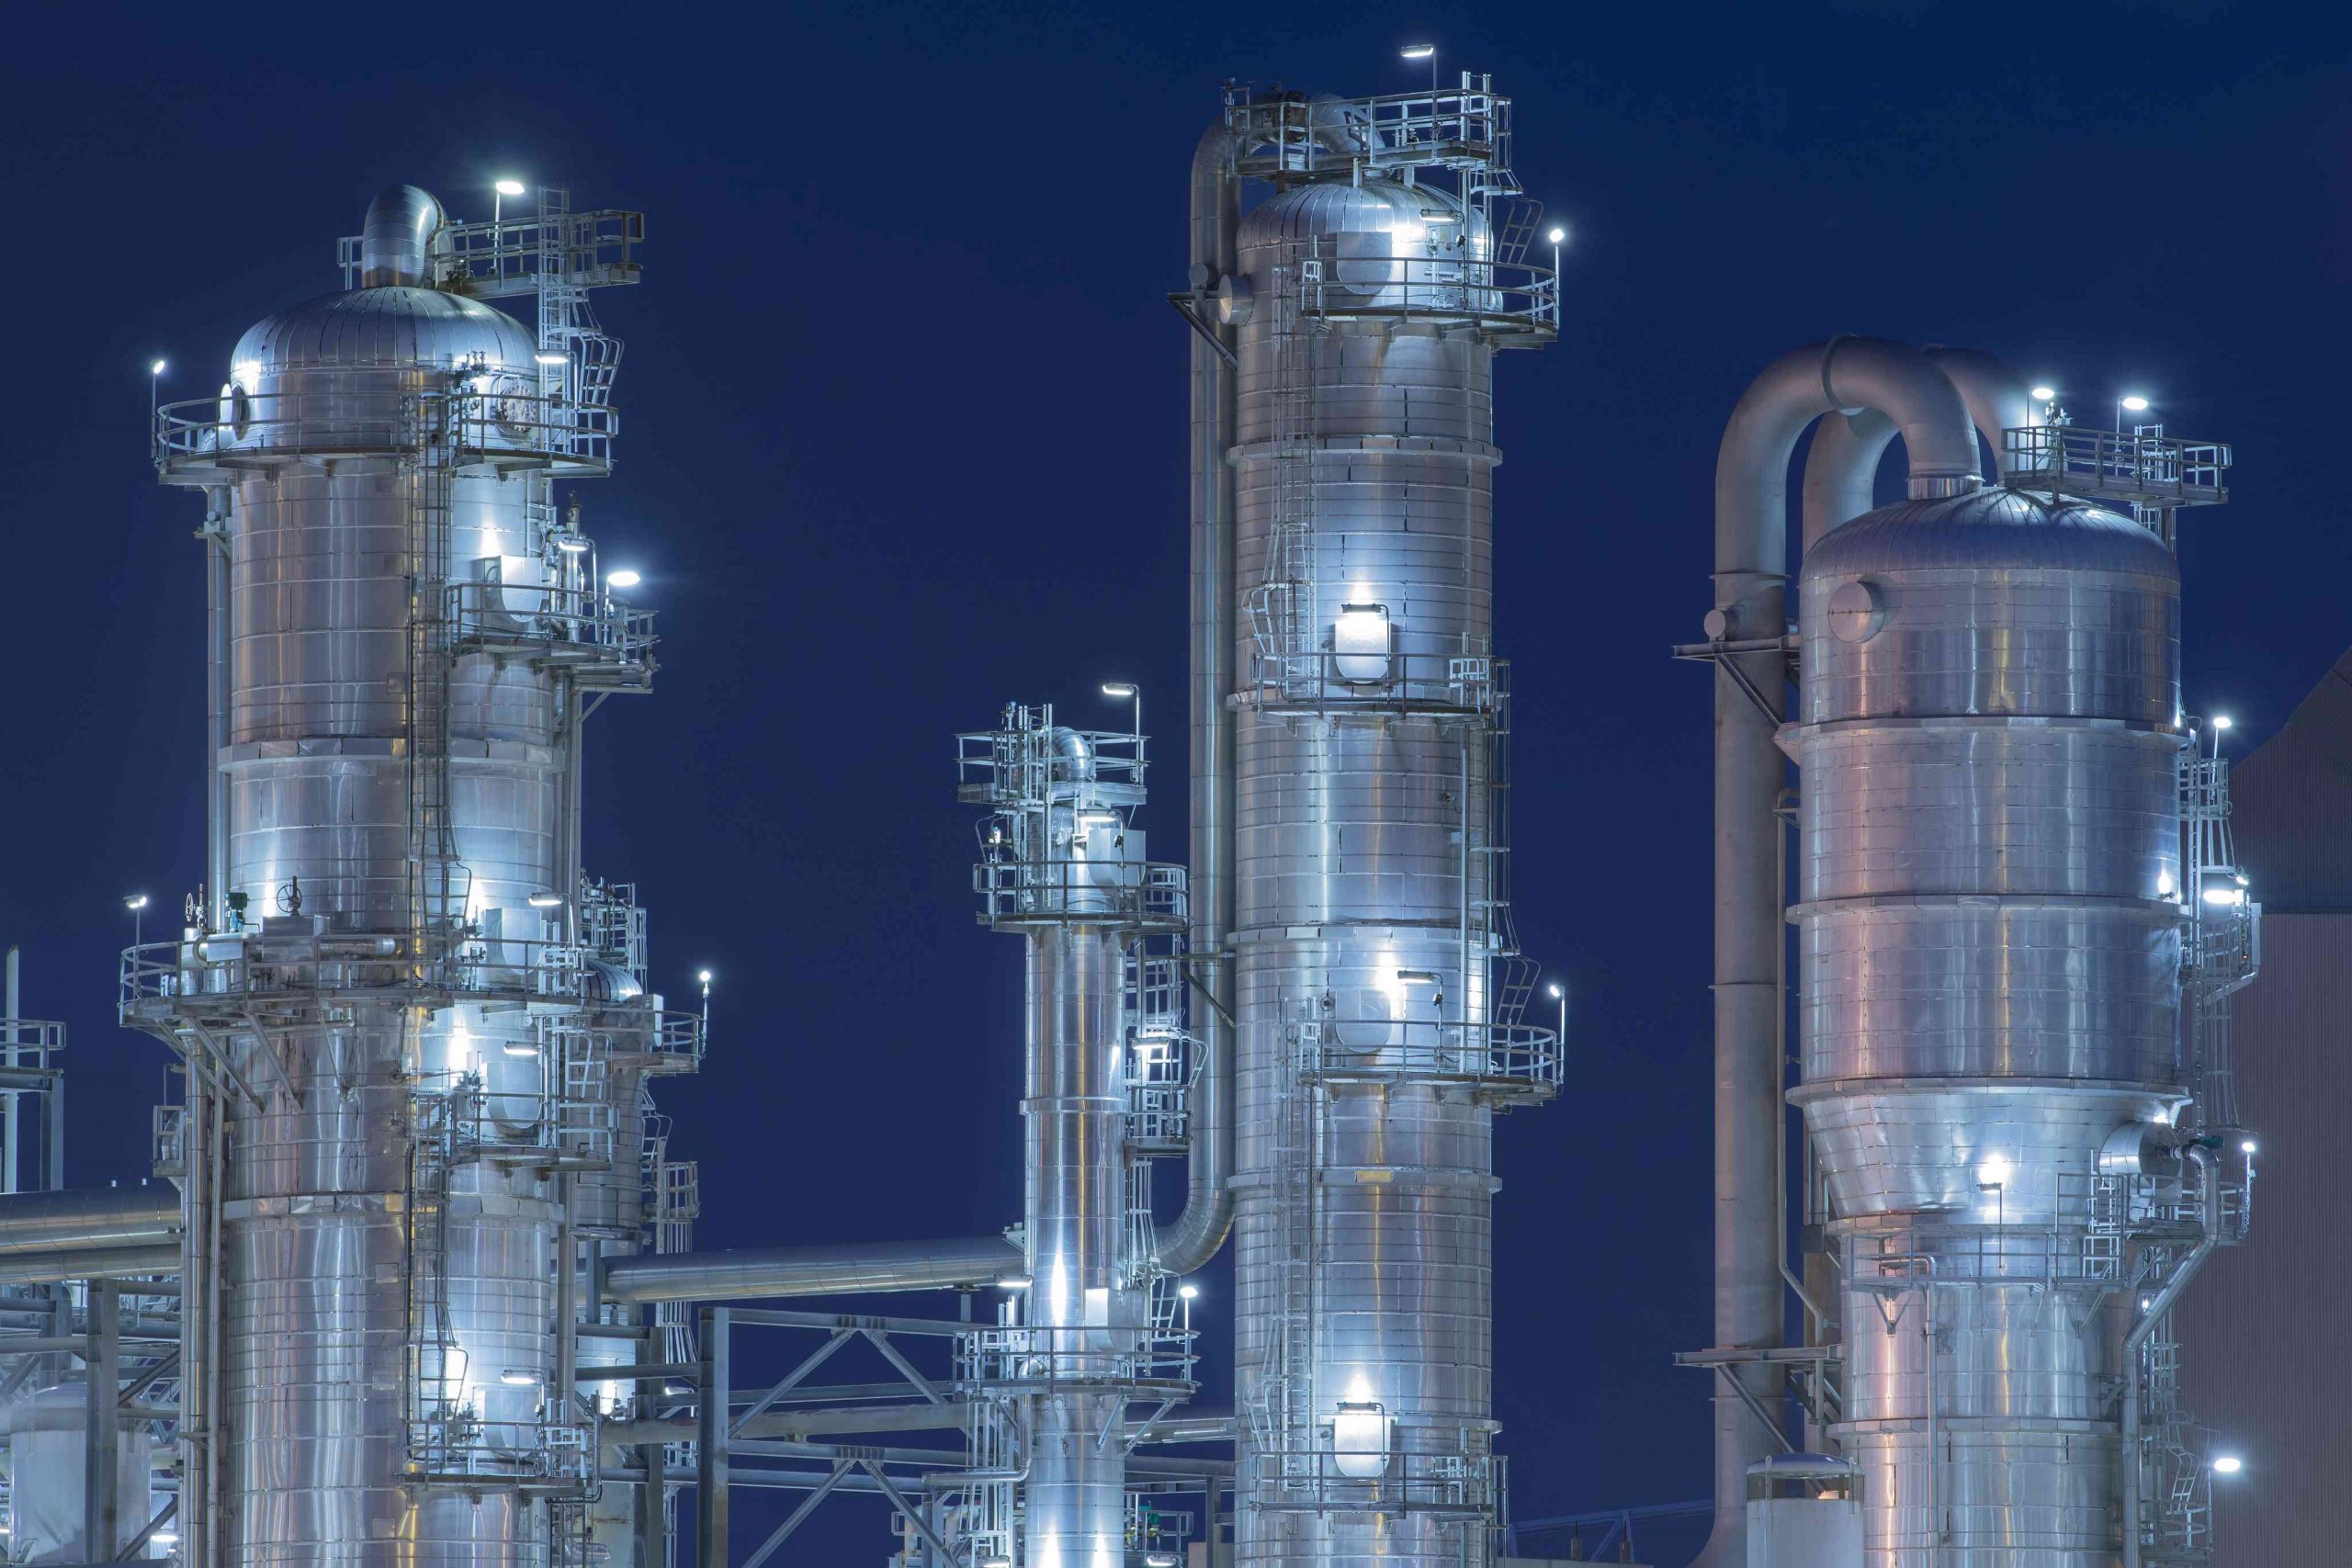 Image of chemical processing equipment throughout a refinery plant taken at night